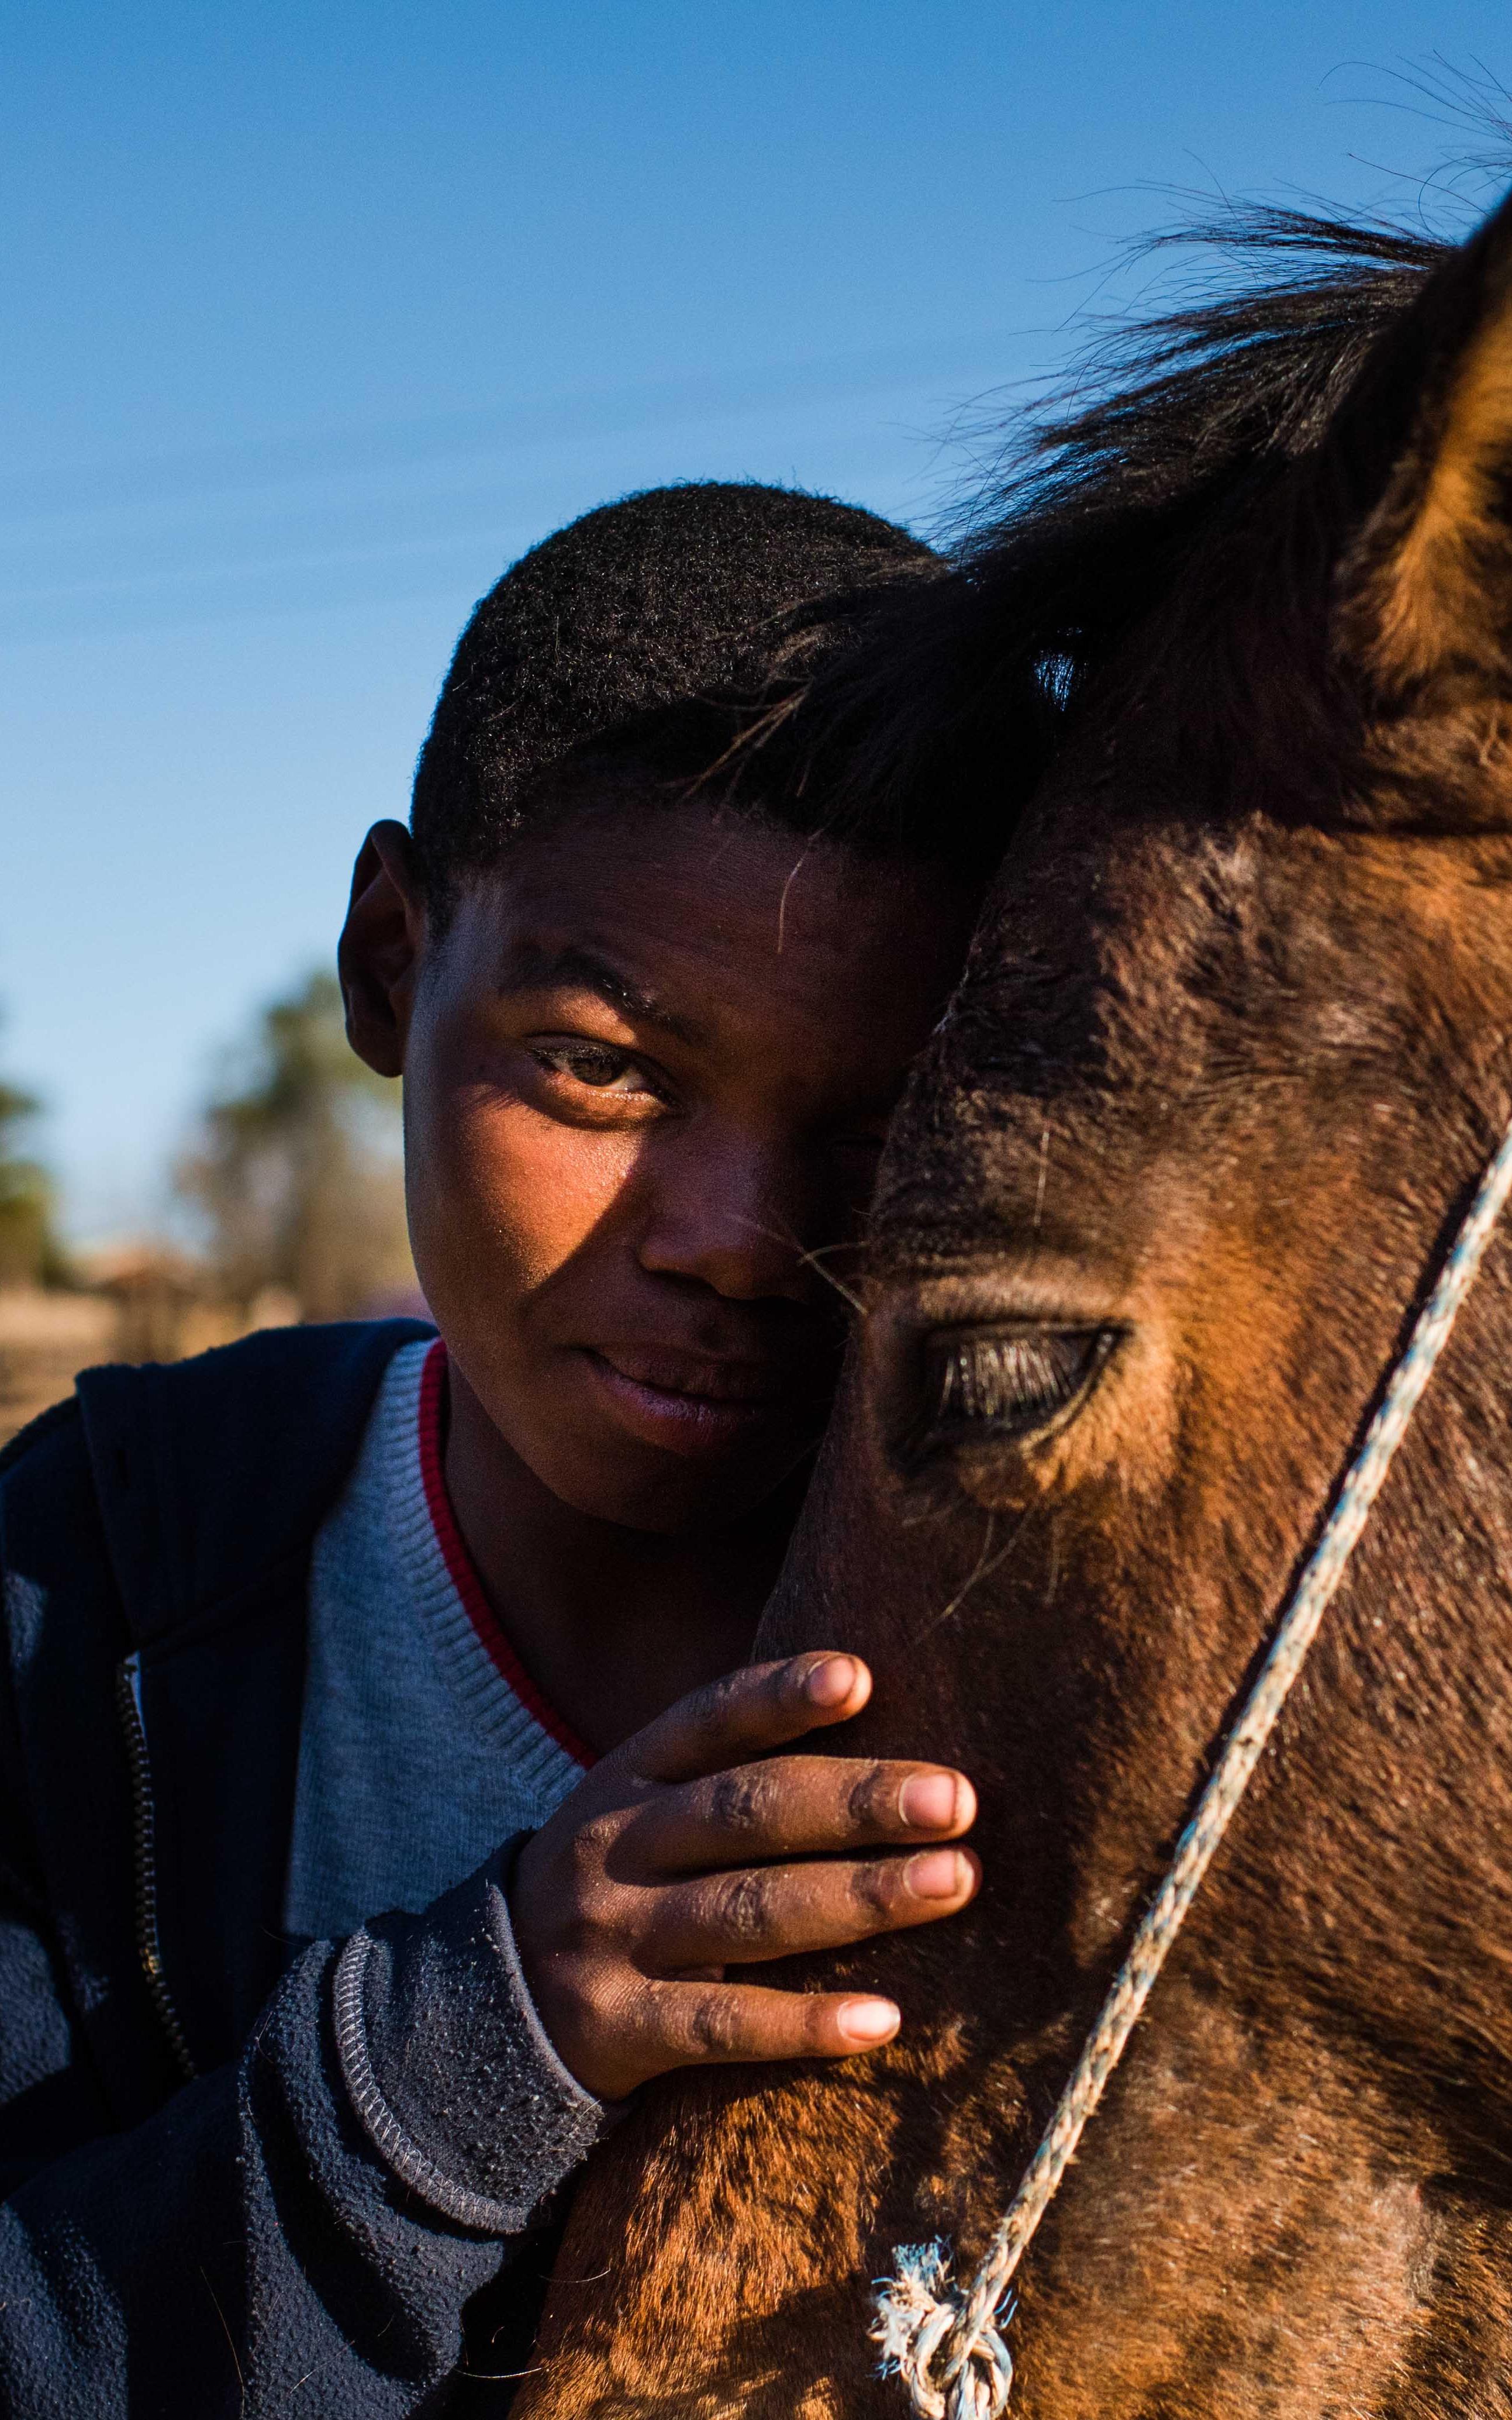 Black child smiling and embracing horse